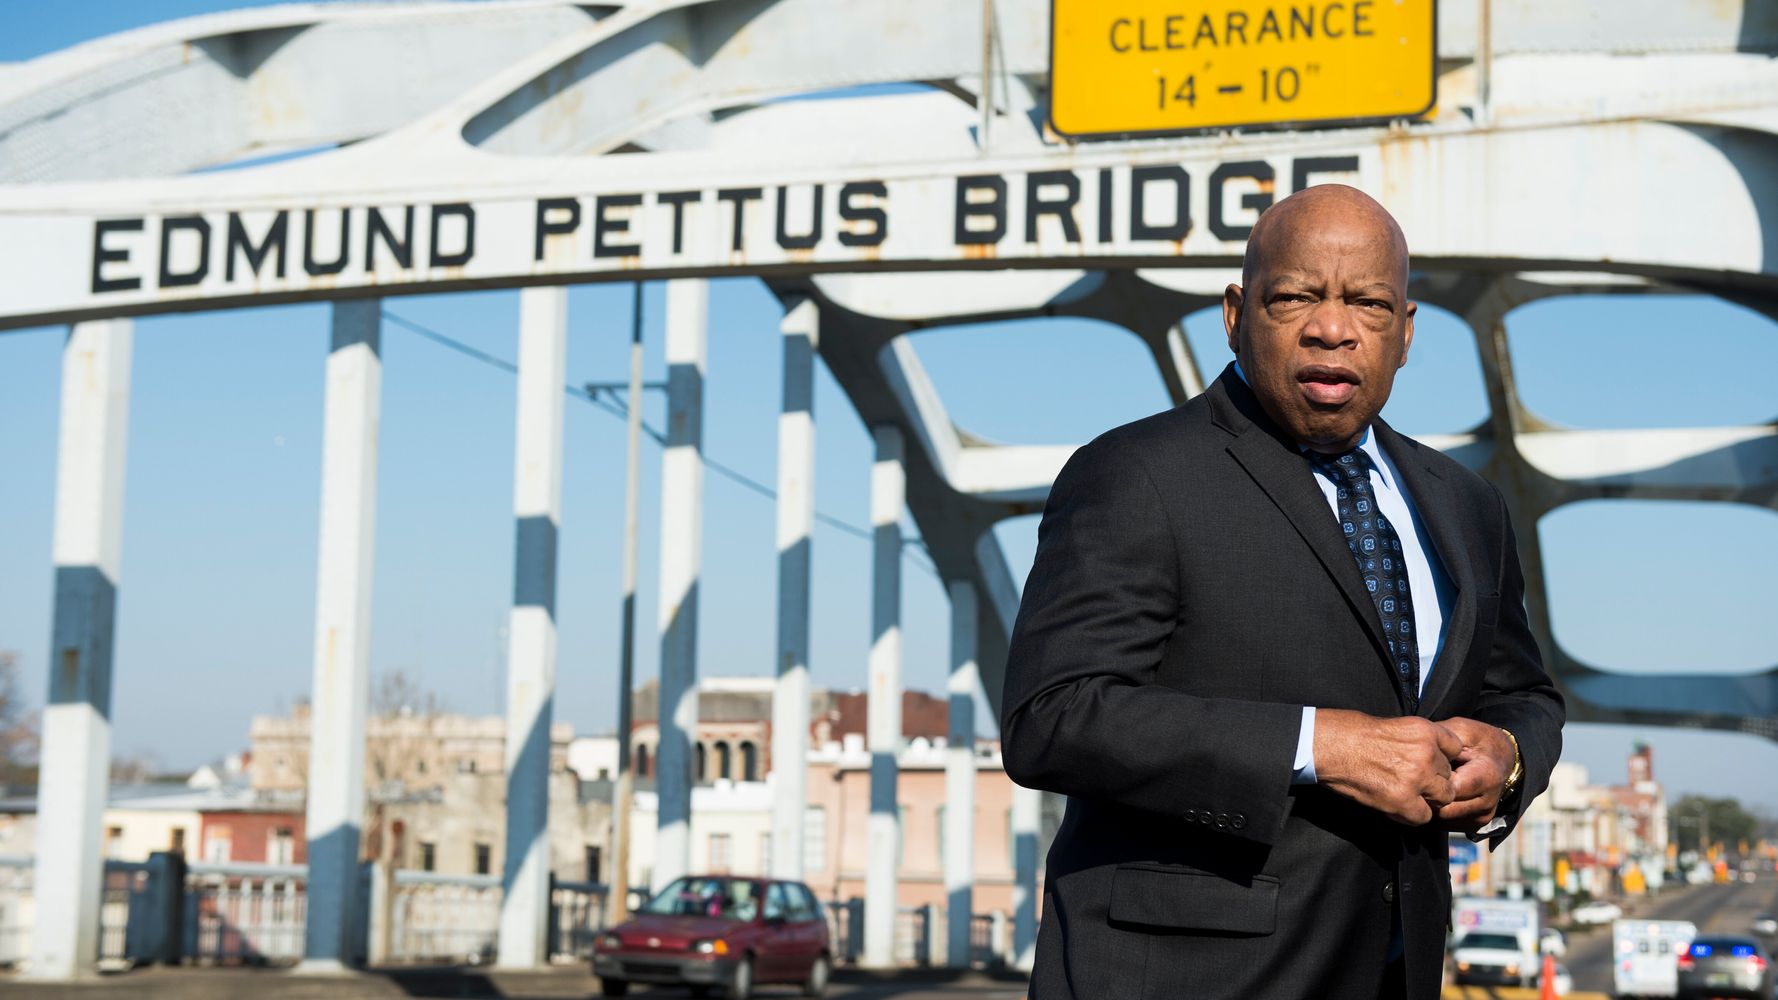 Democrats Introduce John Lewis Voting Law To Restore The Voting Rights Act